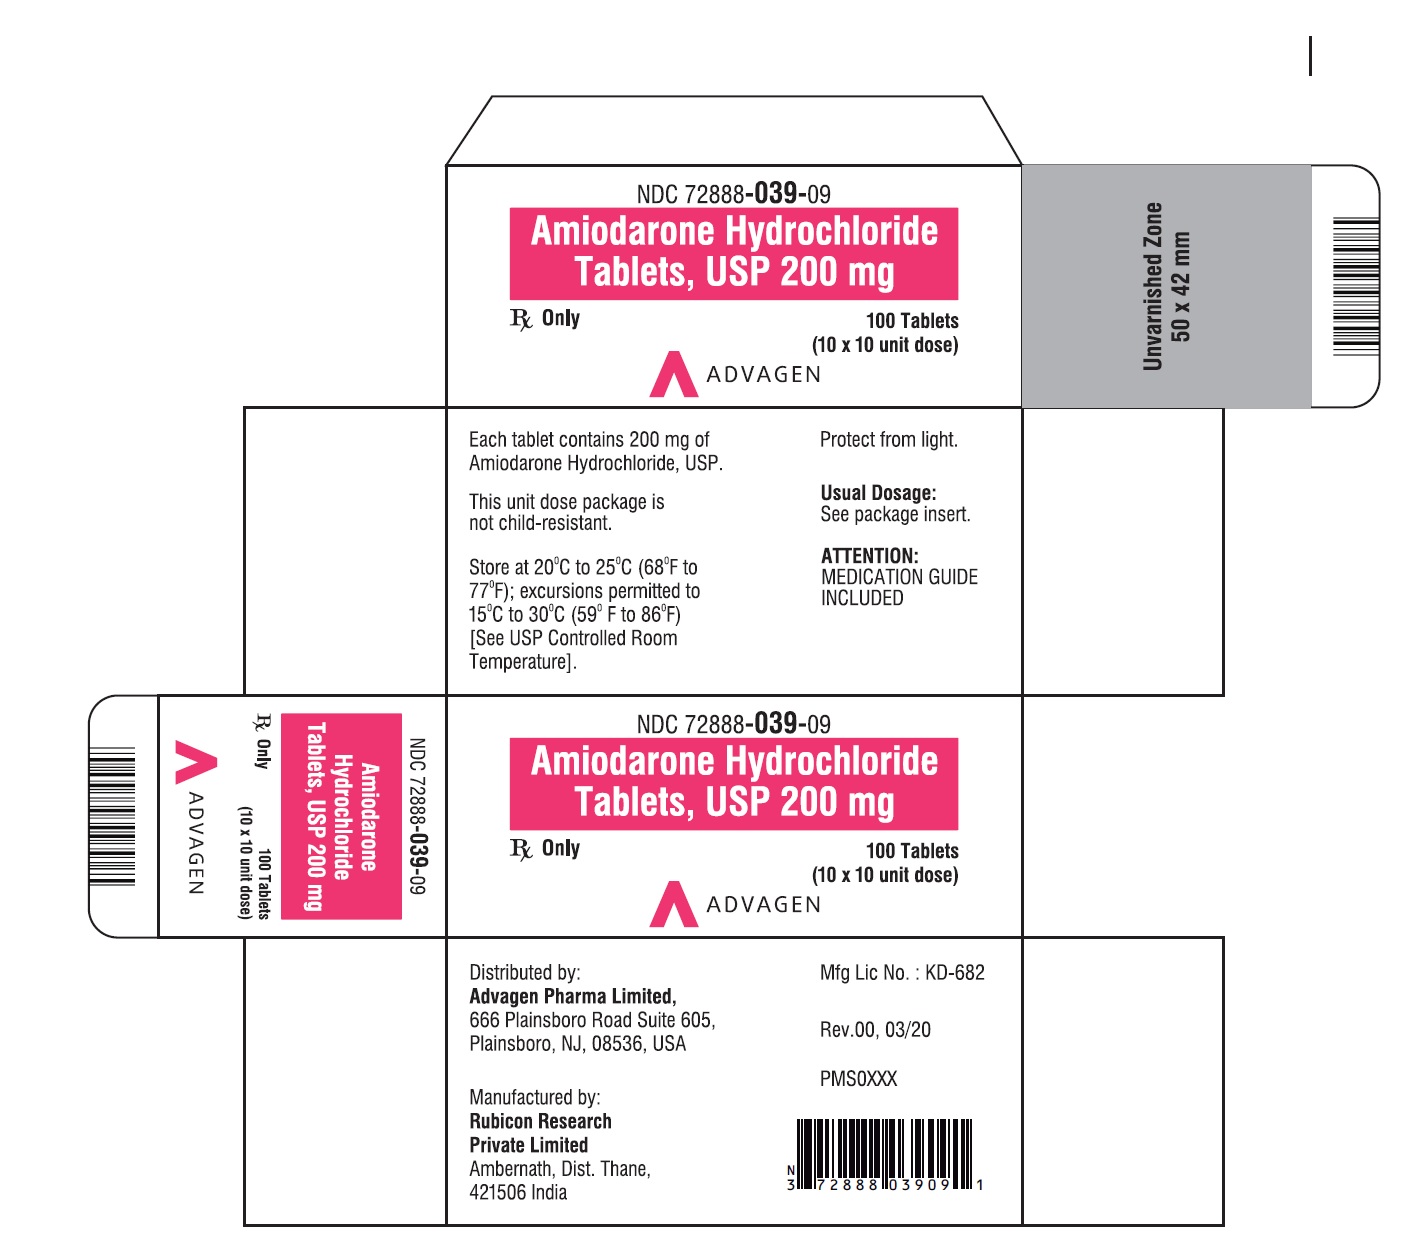 Amiodarone HCL Tablets,USP 200 mg - NDC: <a href=/NDC/72888-039-09>72888-039-09</a> - Carton of 100 (10 x 10) Unit dose blisters